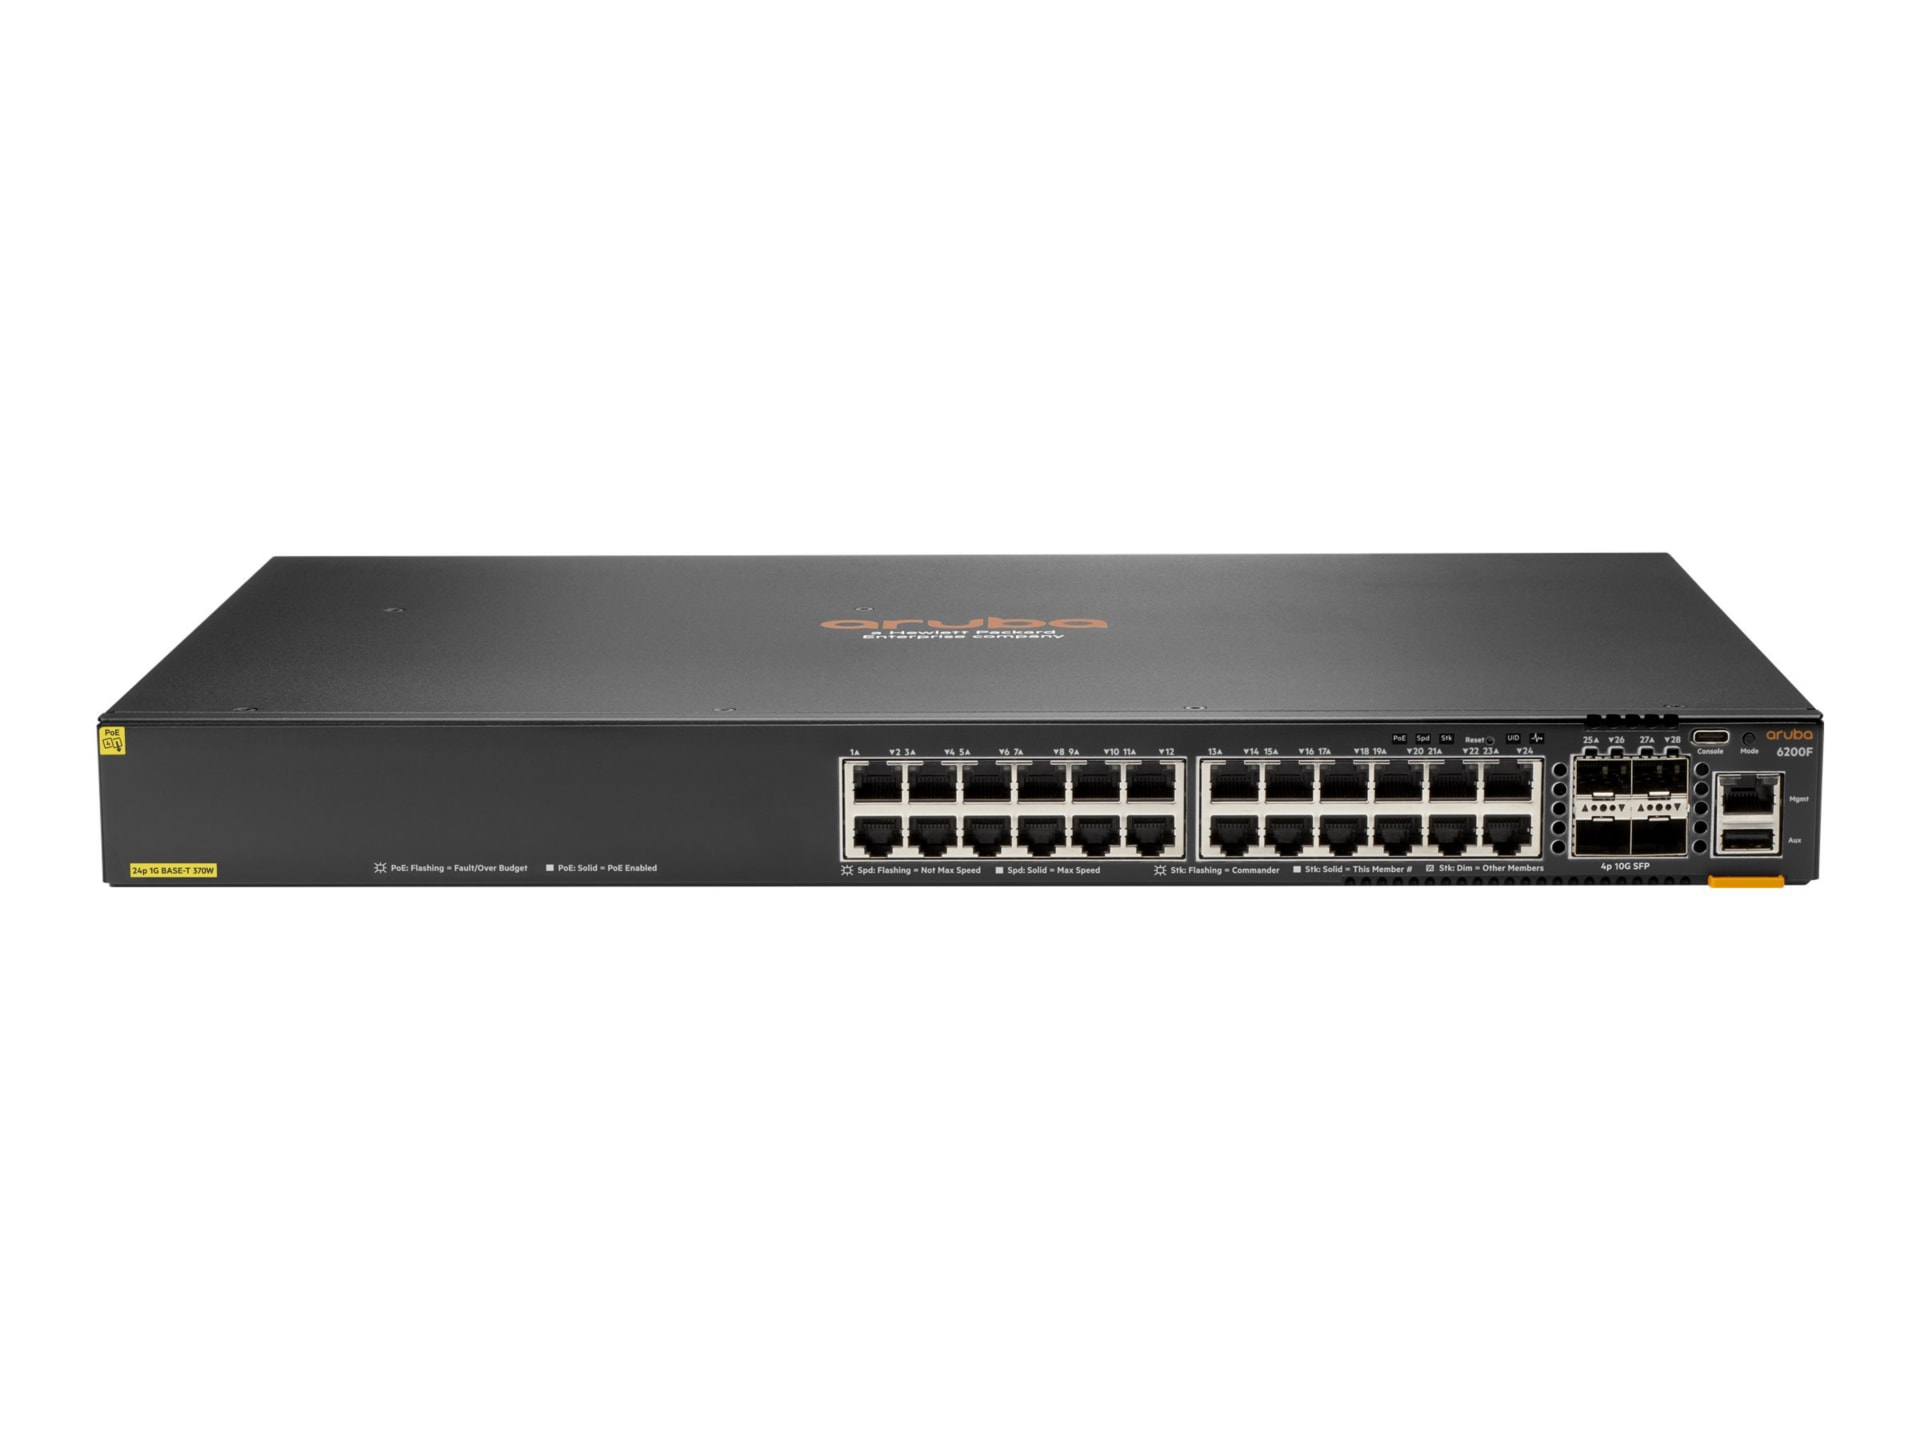 HPE Aruba Networking CX 6200F 24G Class 4 PoE 4SFP 370W Switch - switch - Max. Stacking Distance 10 kms - 24 ports -